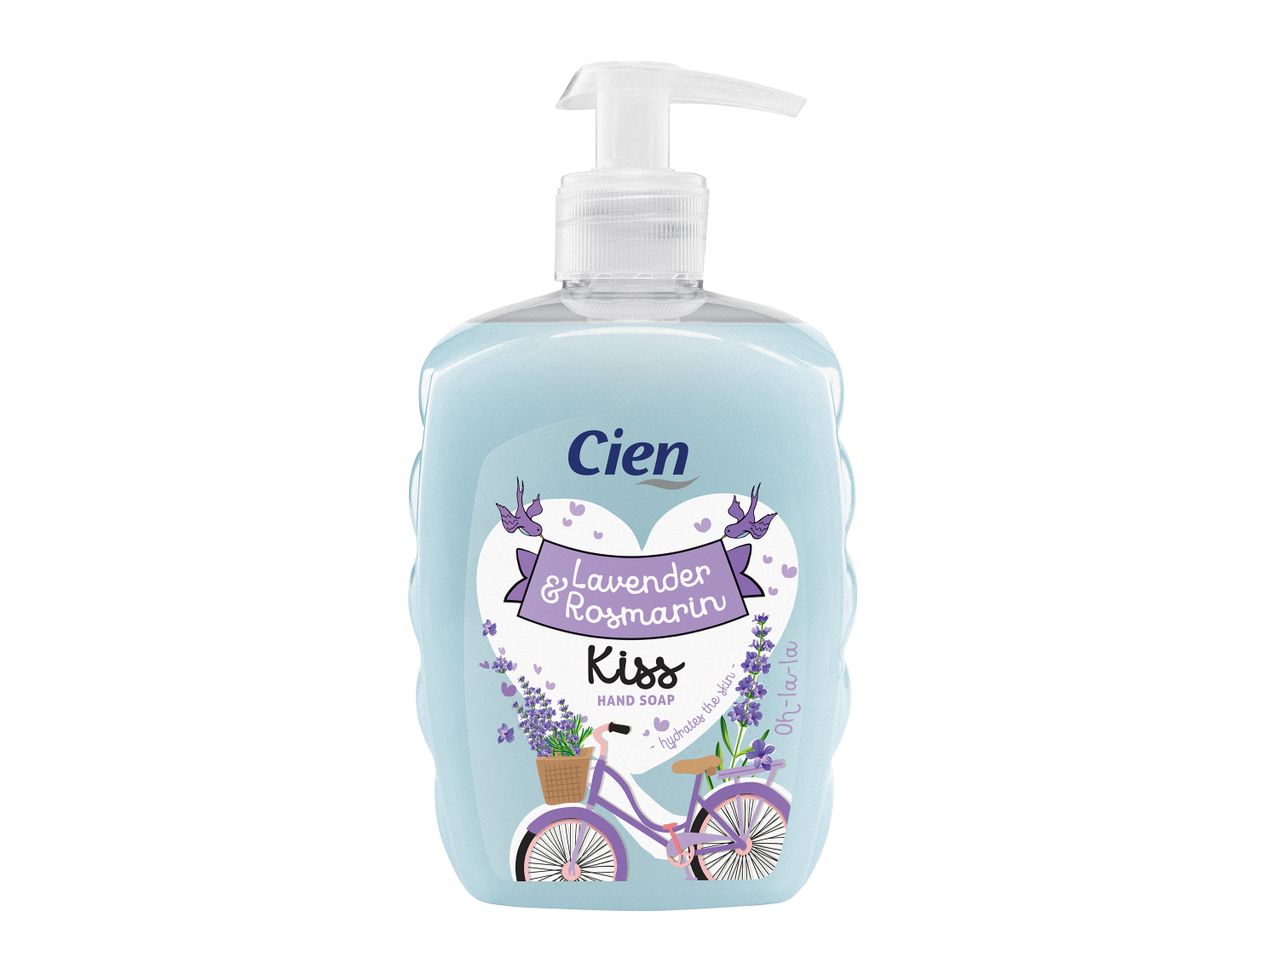 Go to full screen view: Cien Hand Soap - Image 1